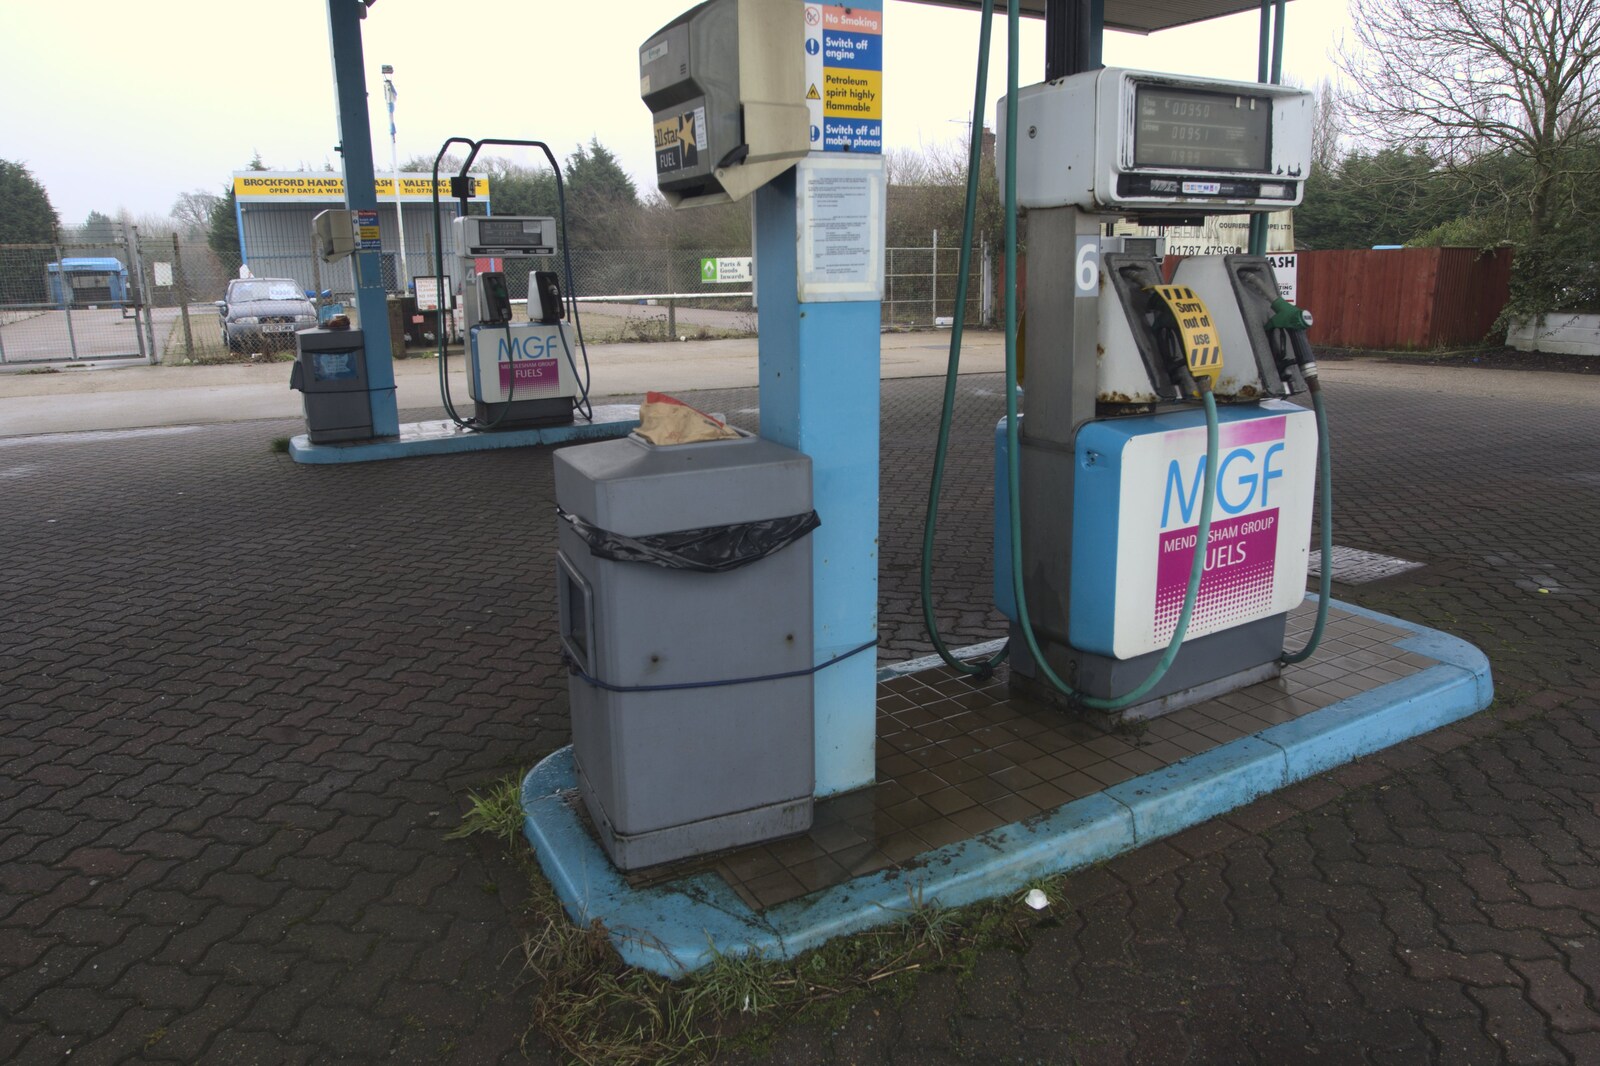 A last look at the abandoned petrol pumps from A Derelict Petrol Station, Brockford Street, Suffolk - 7th February 2010